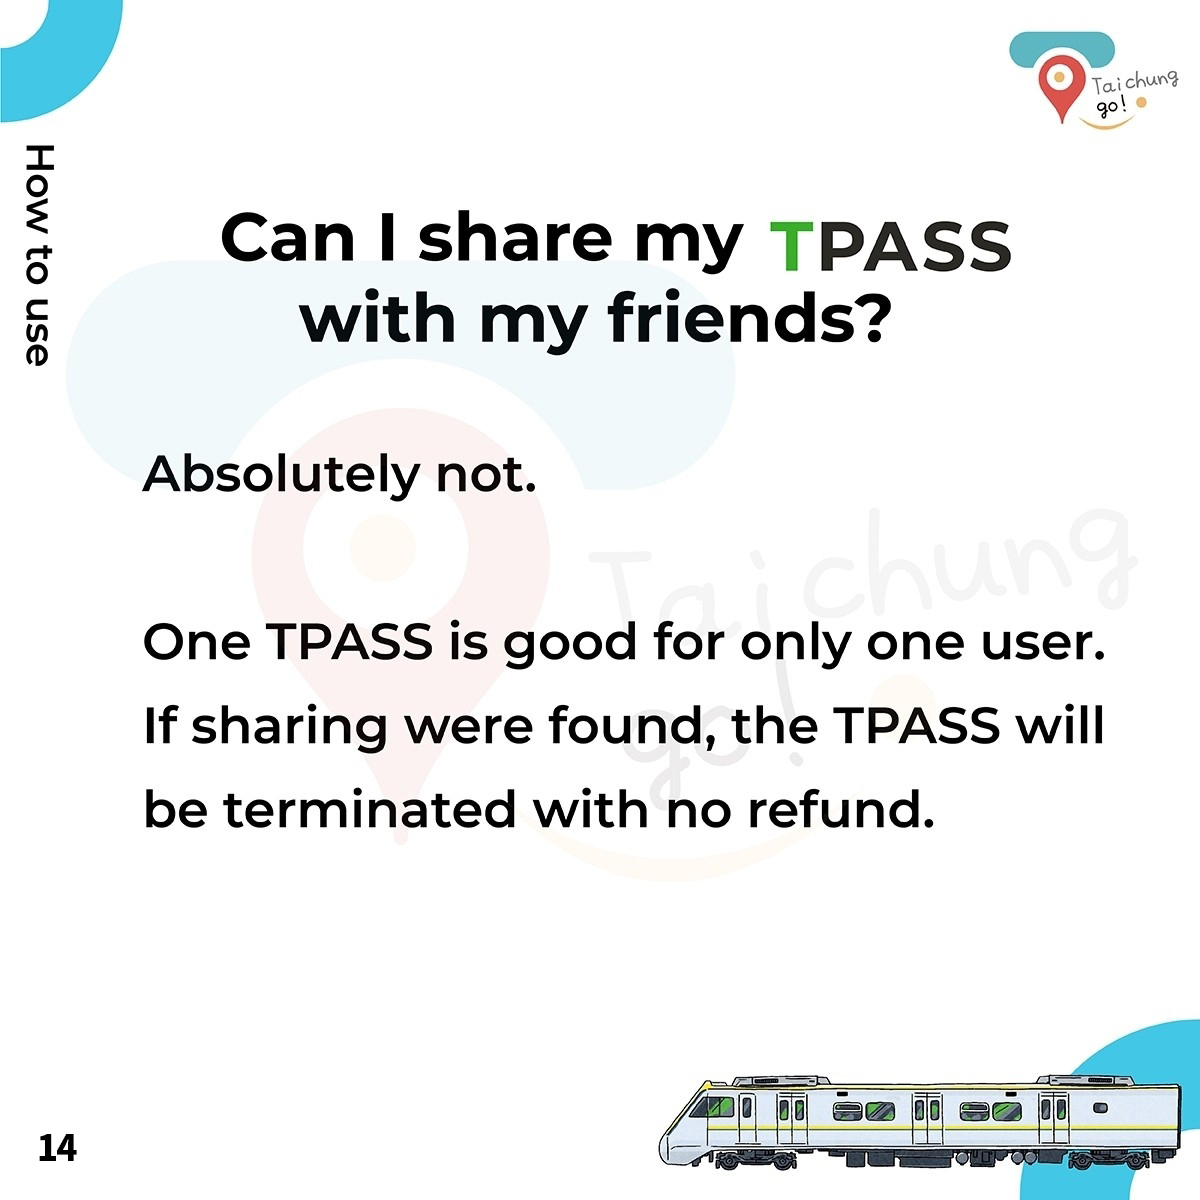 You can not share your TPASS with your friends absolutely. If sharing were found,the TPASS will be terminated with no refund.